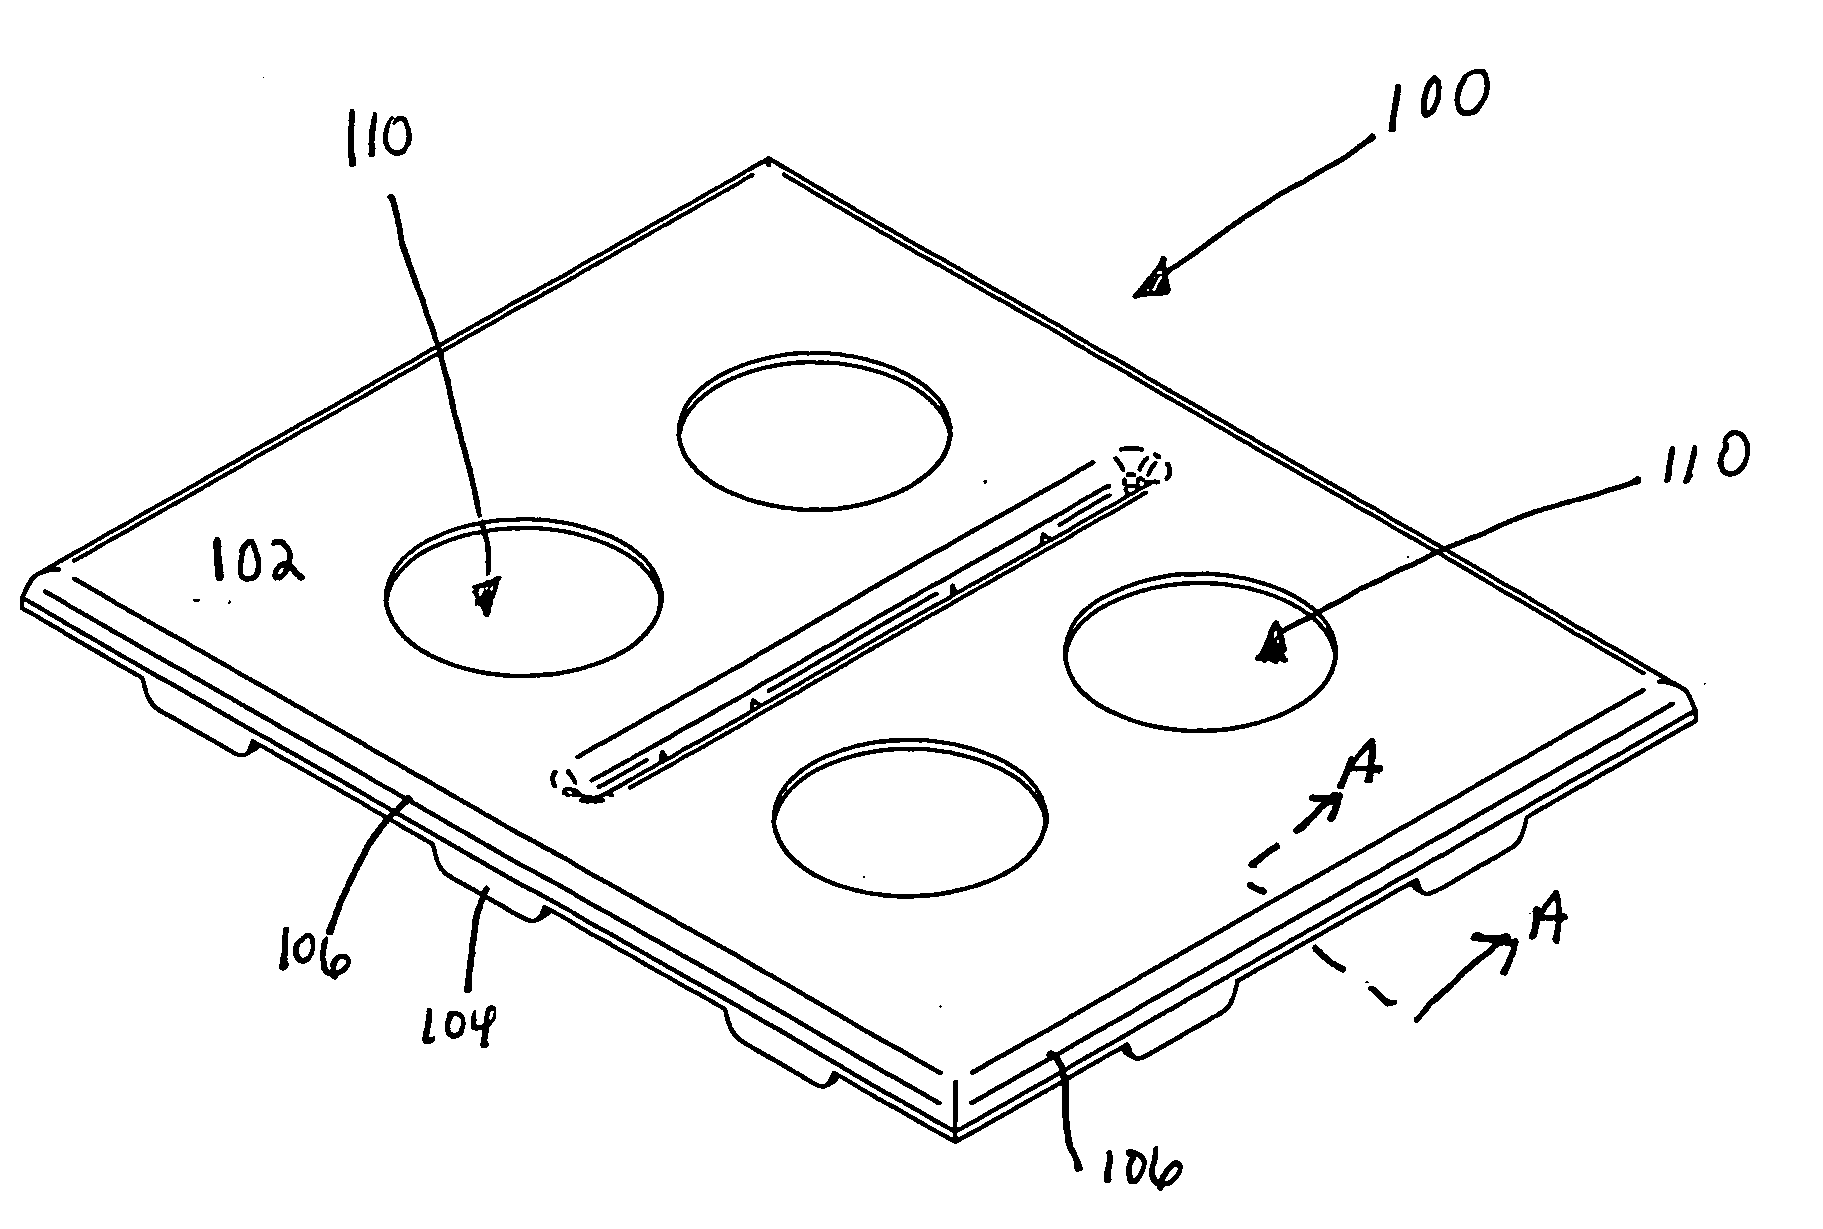 Electronic shielding apparatus and methods